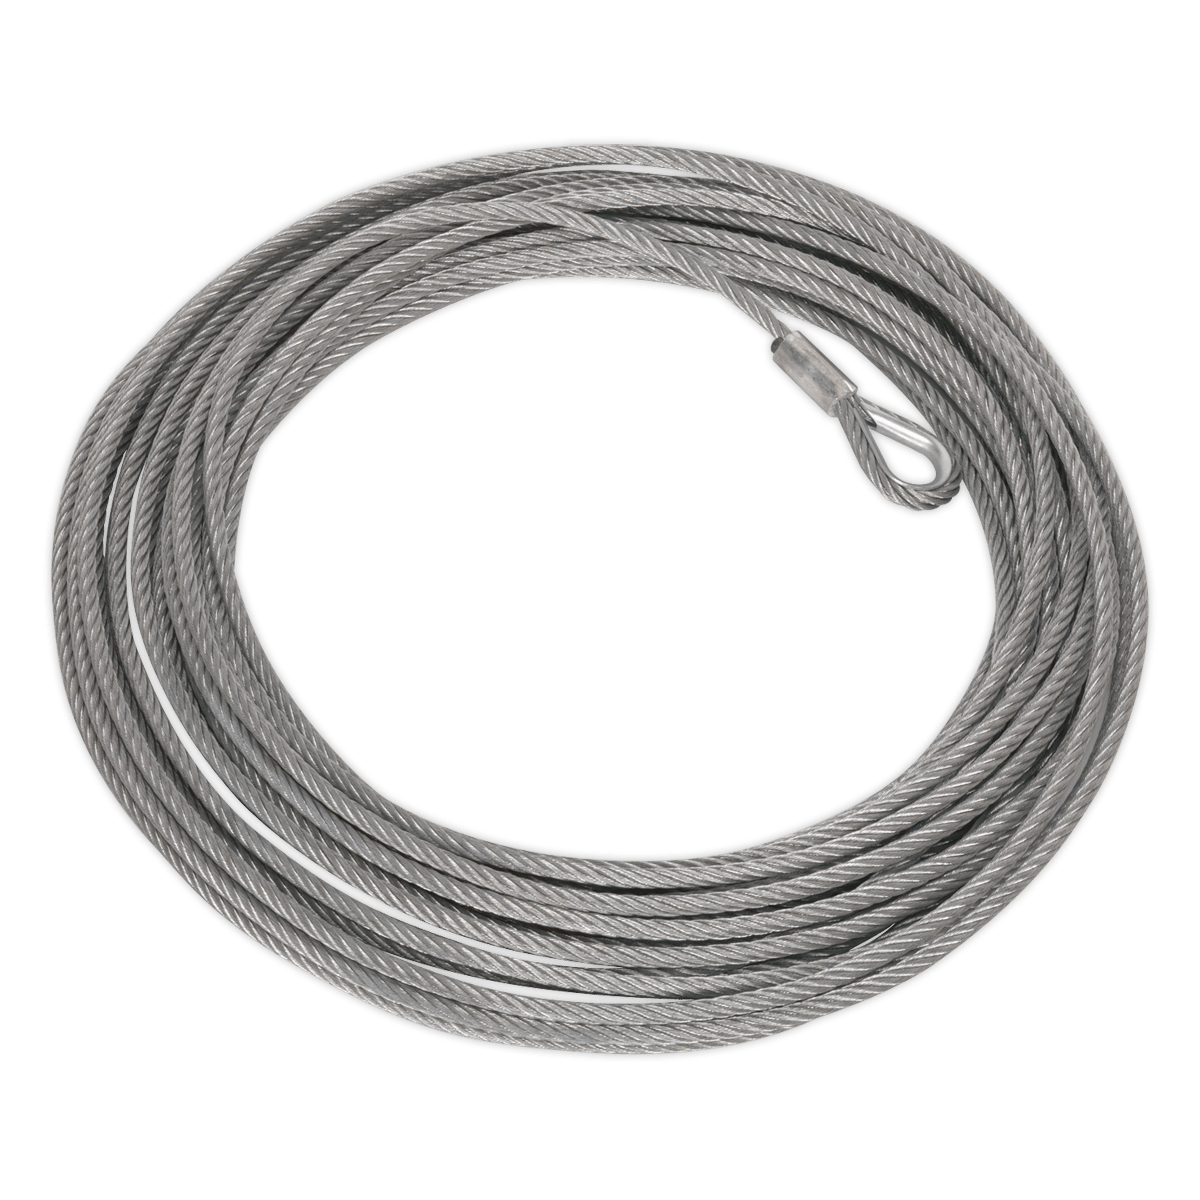 Sealey Wire Rope (Ø9.2mm x 26m) for SWR4300 & SRW5450